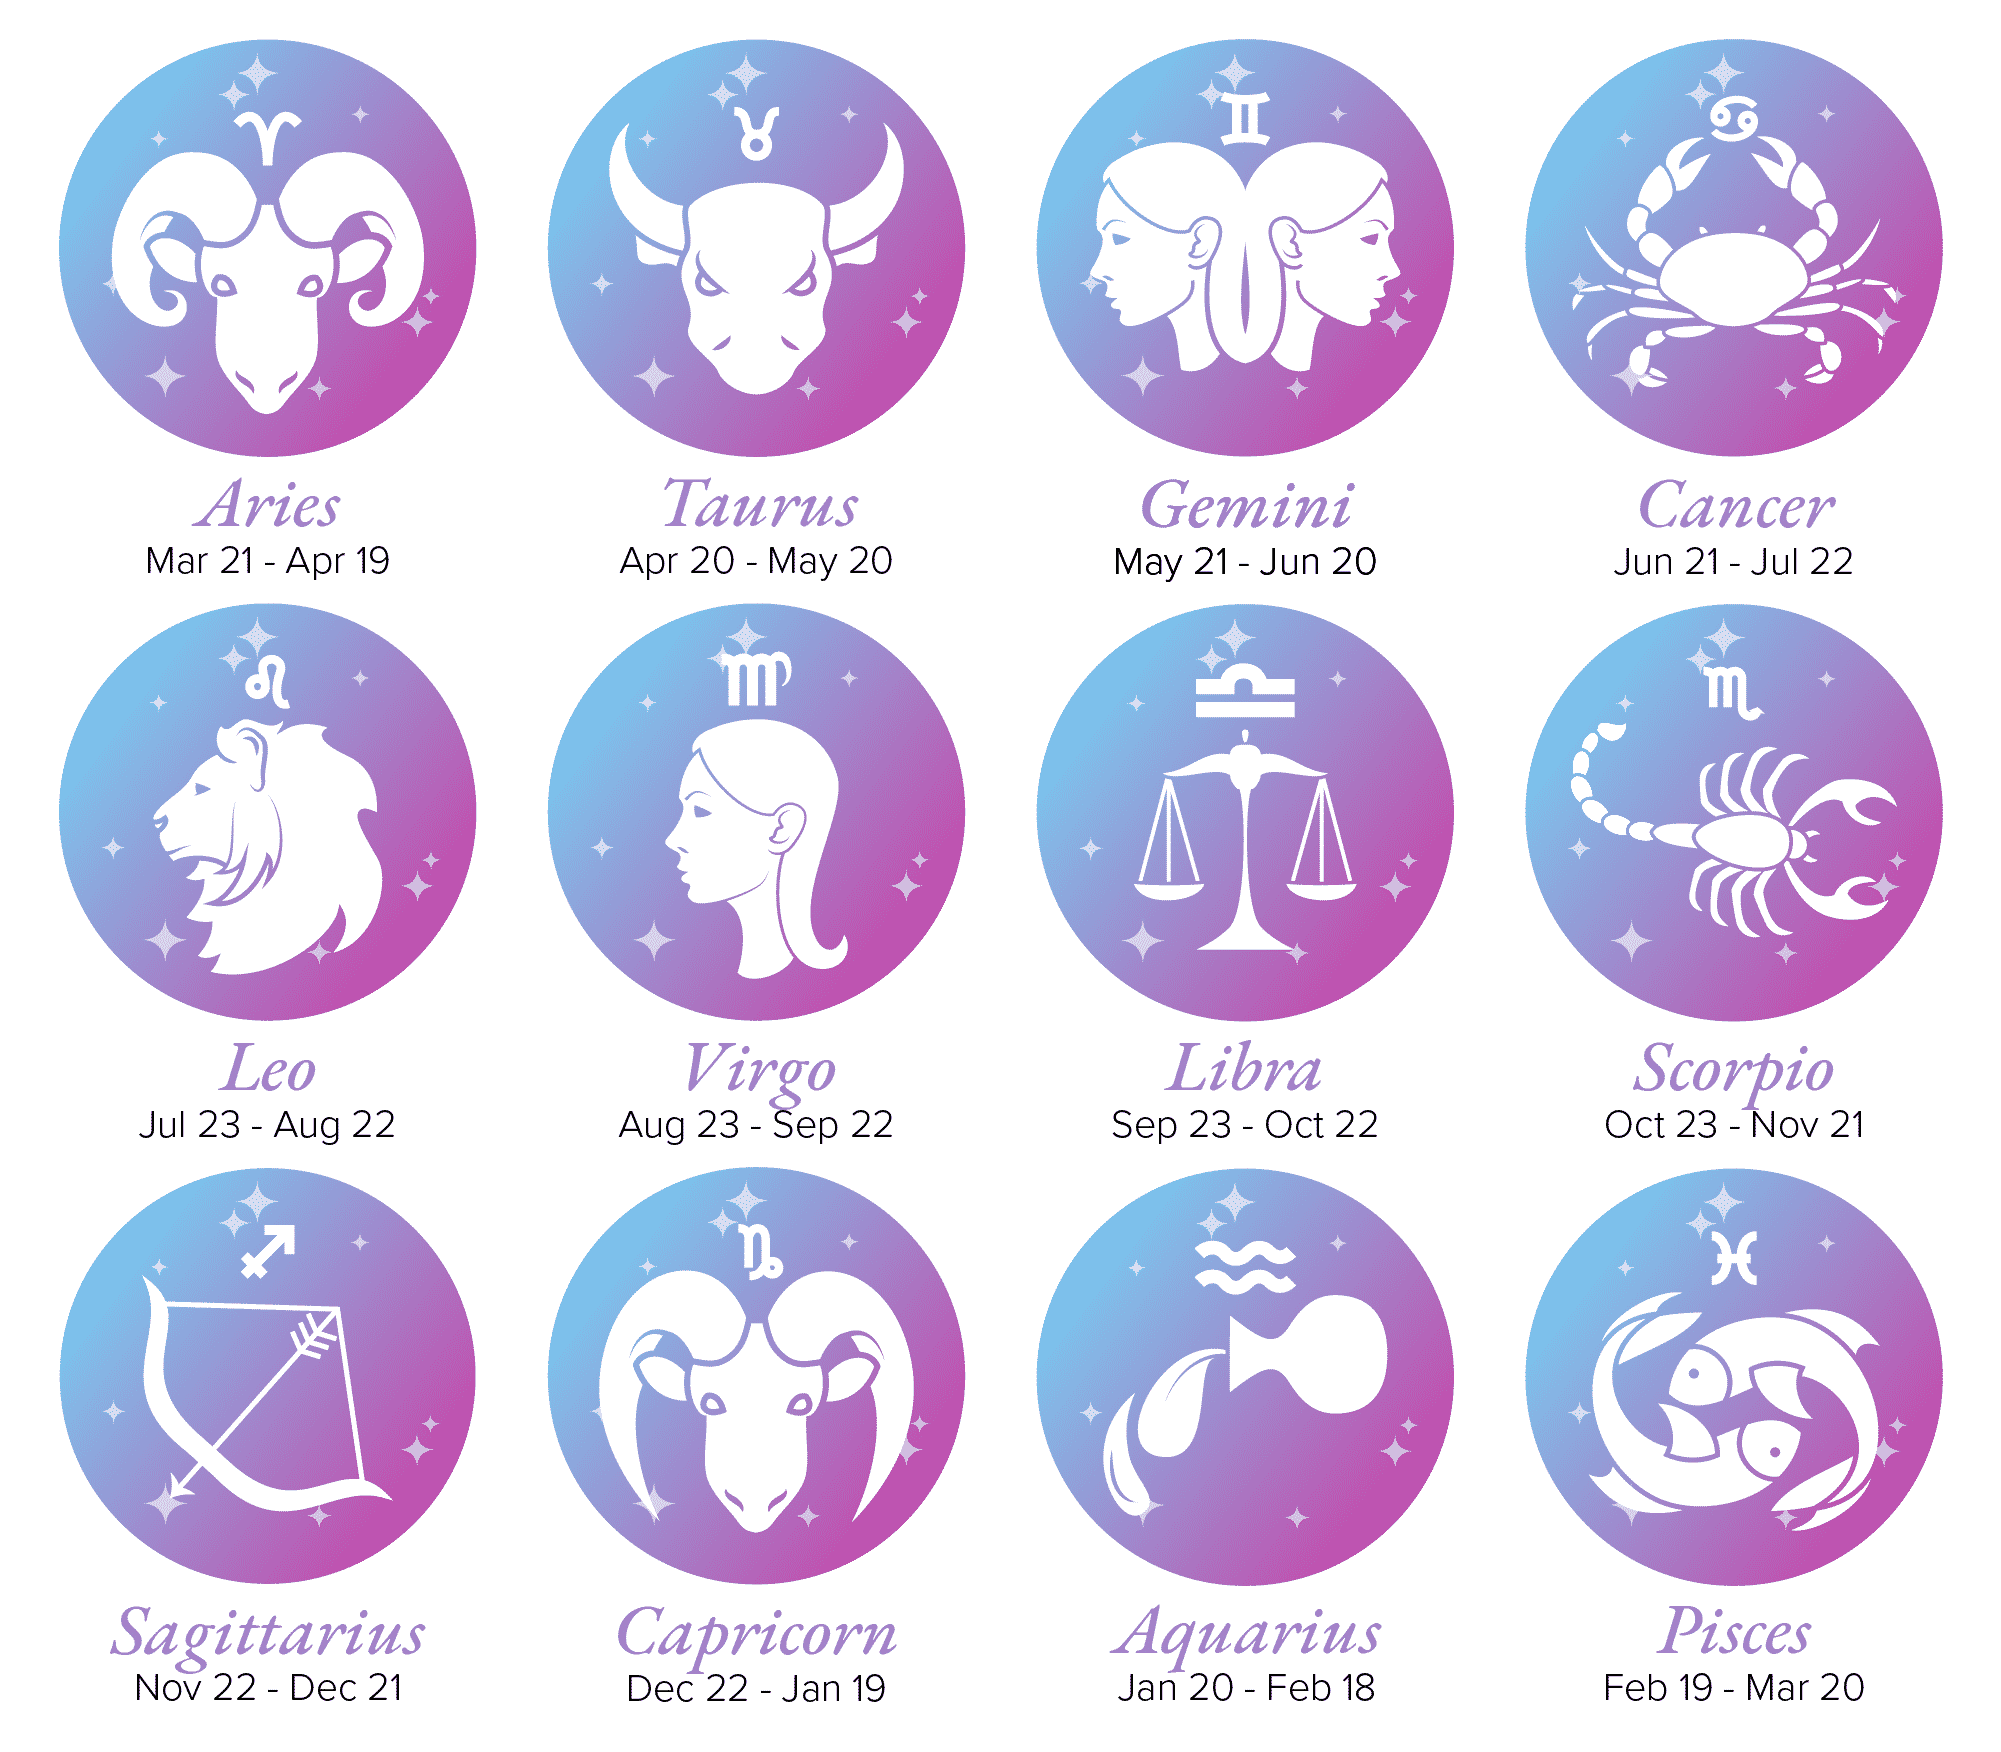 Zodiac Signs Explained: Dates, Meanings & Characteristics